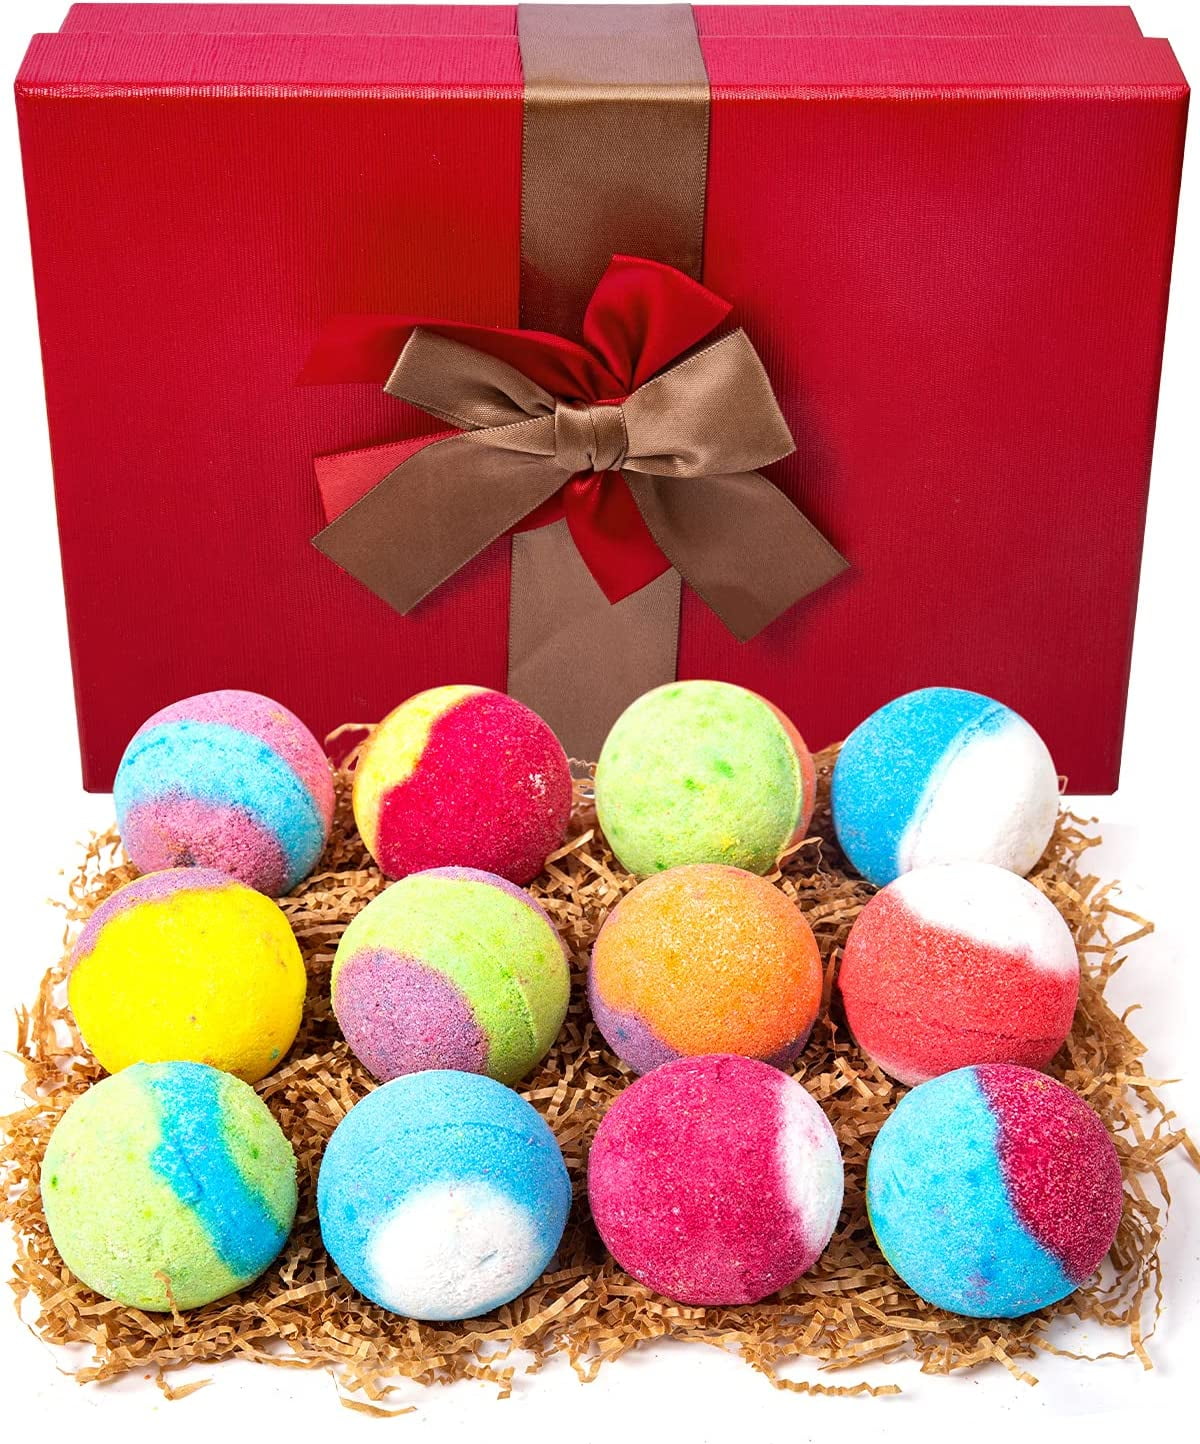 DIY Gift Kits Bath Bomb Kit (Deluxe) 8 All Natural Essential Oils and  Recipe Pack Makes 12+ DIY Cupcake Mold Bath Bombs, Gift Box Included.